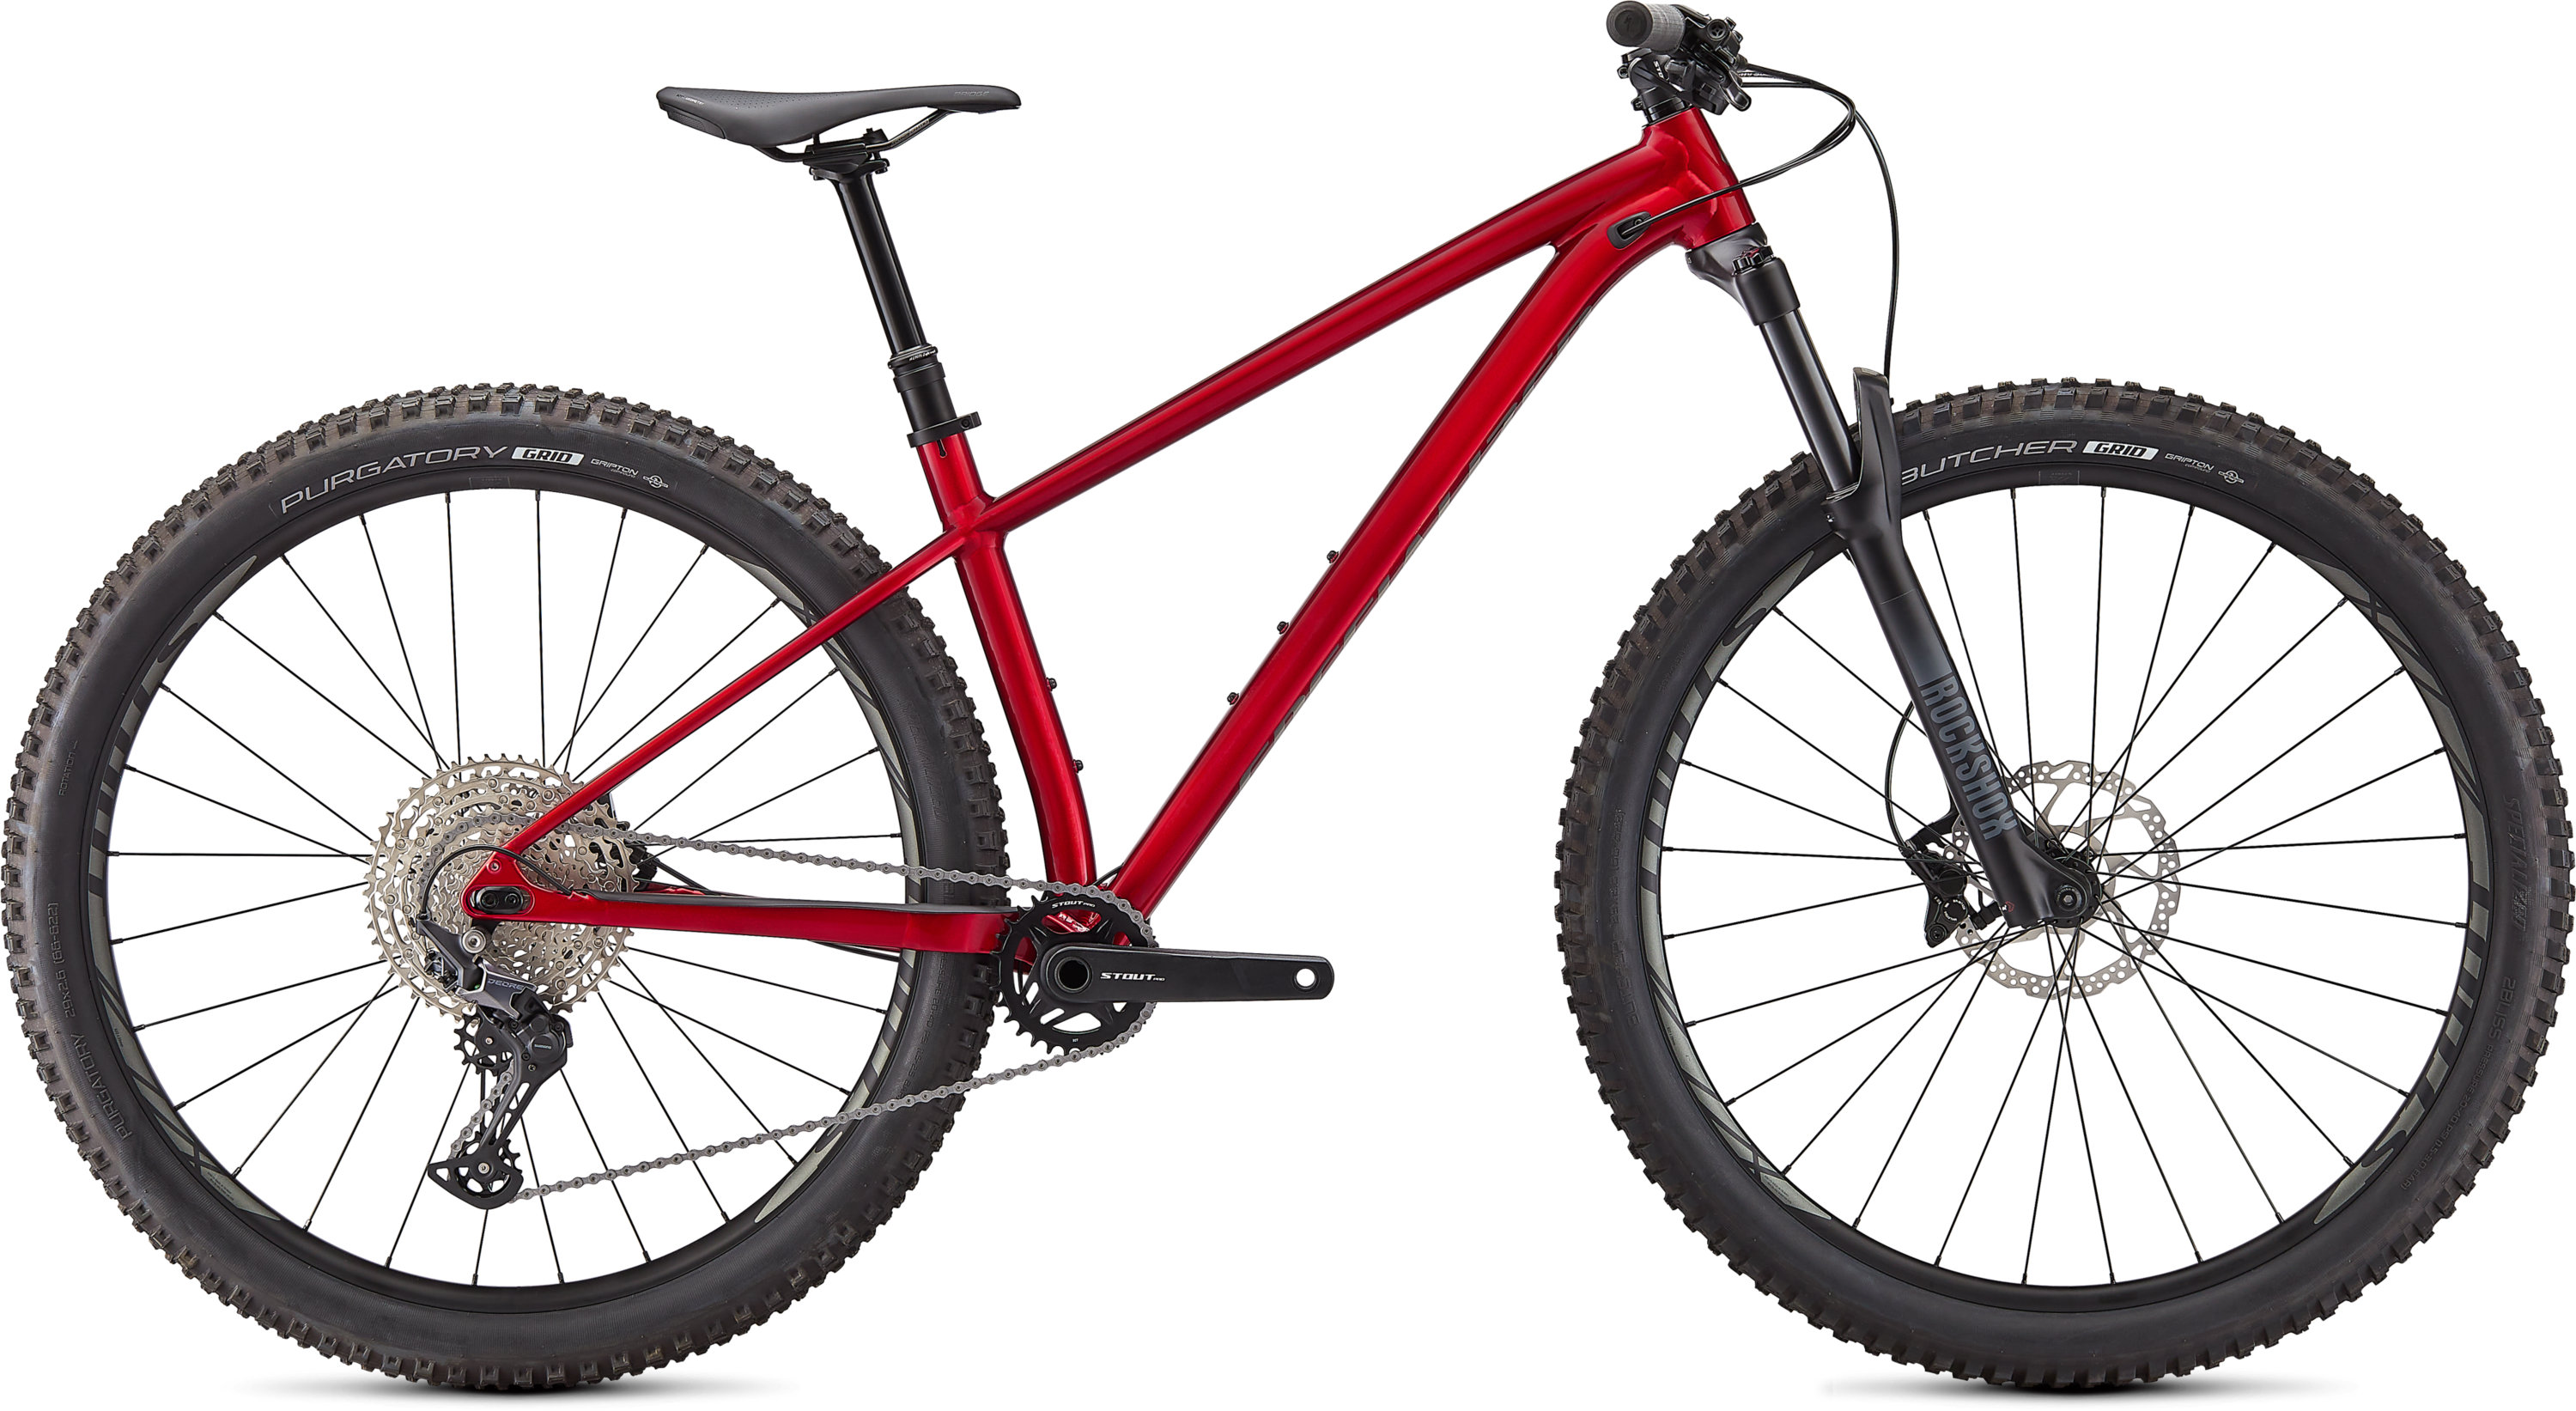 Review: Specialized Fuse Comp 29